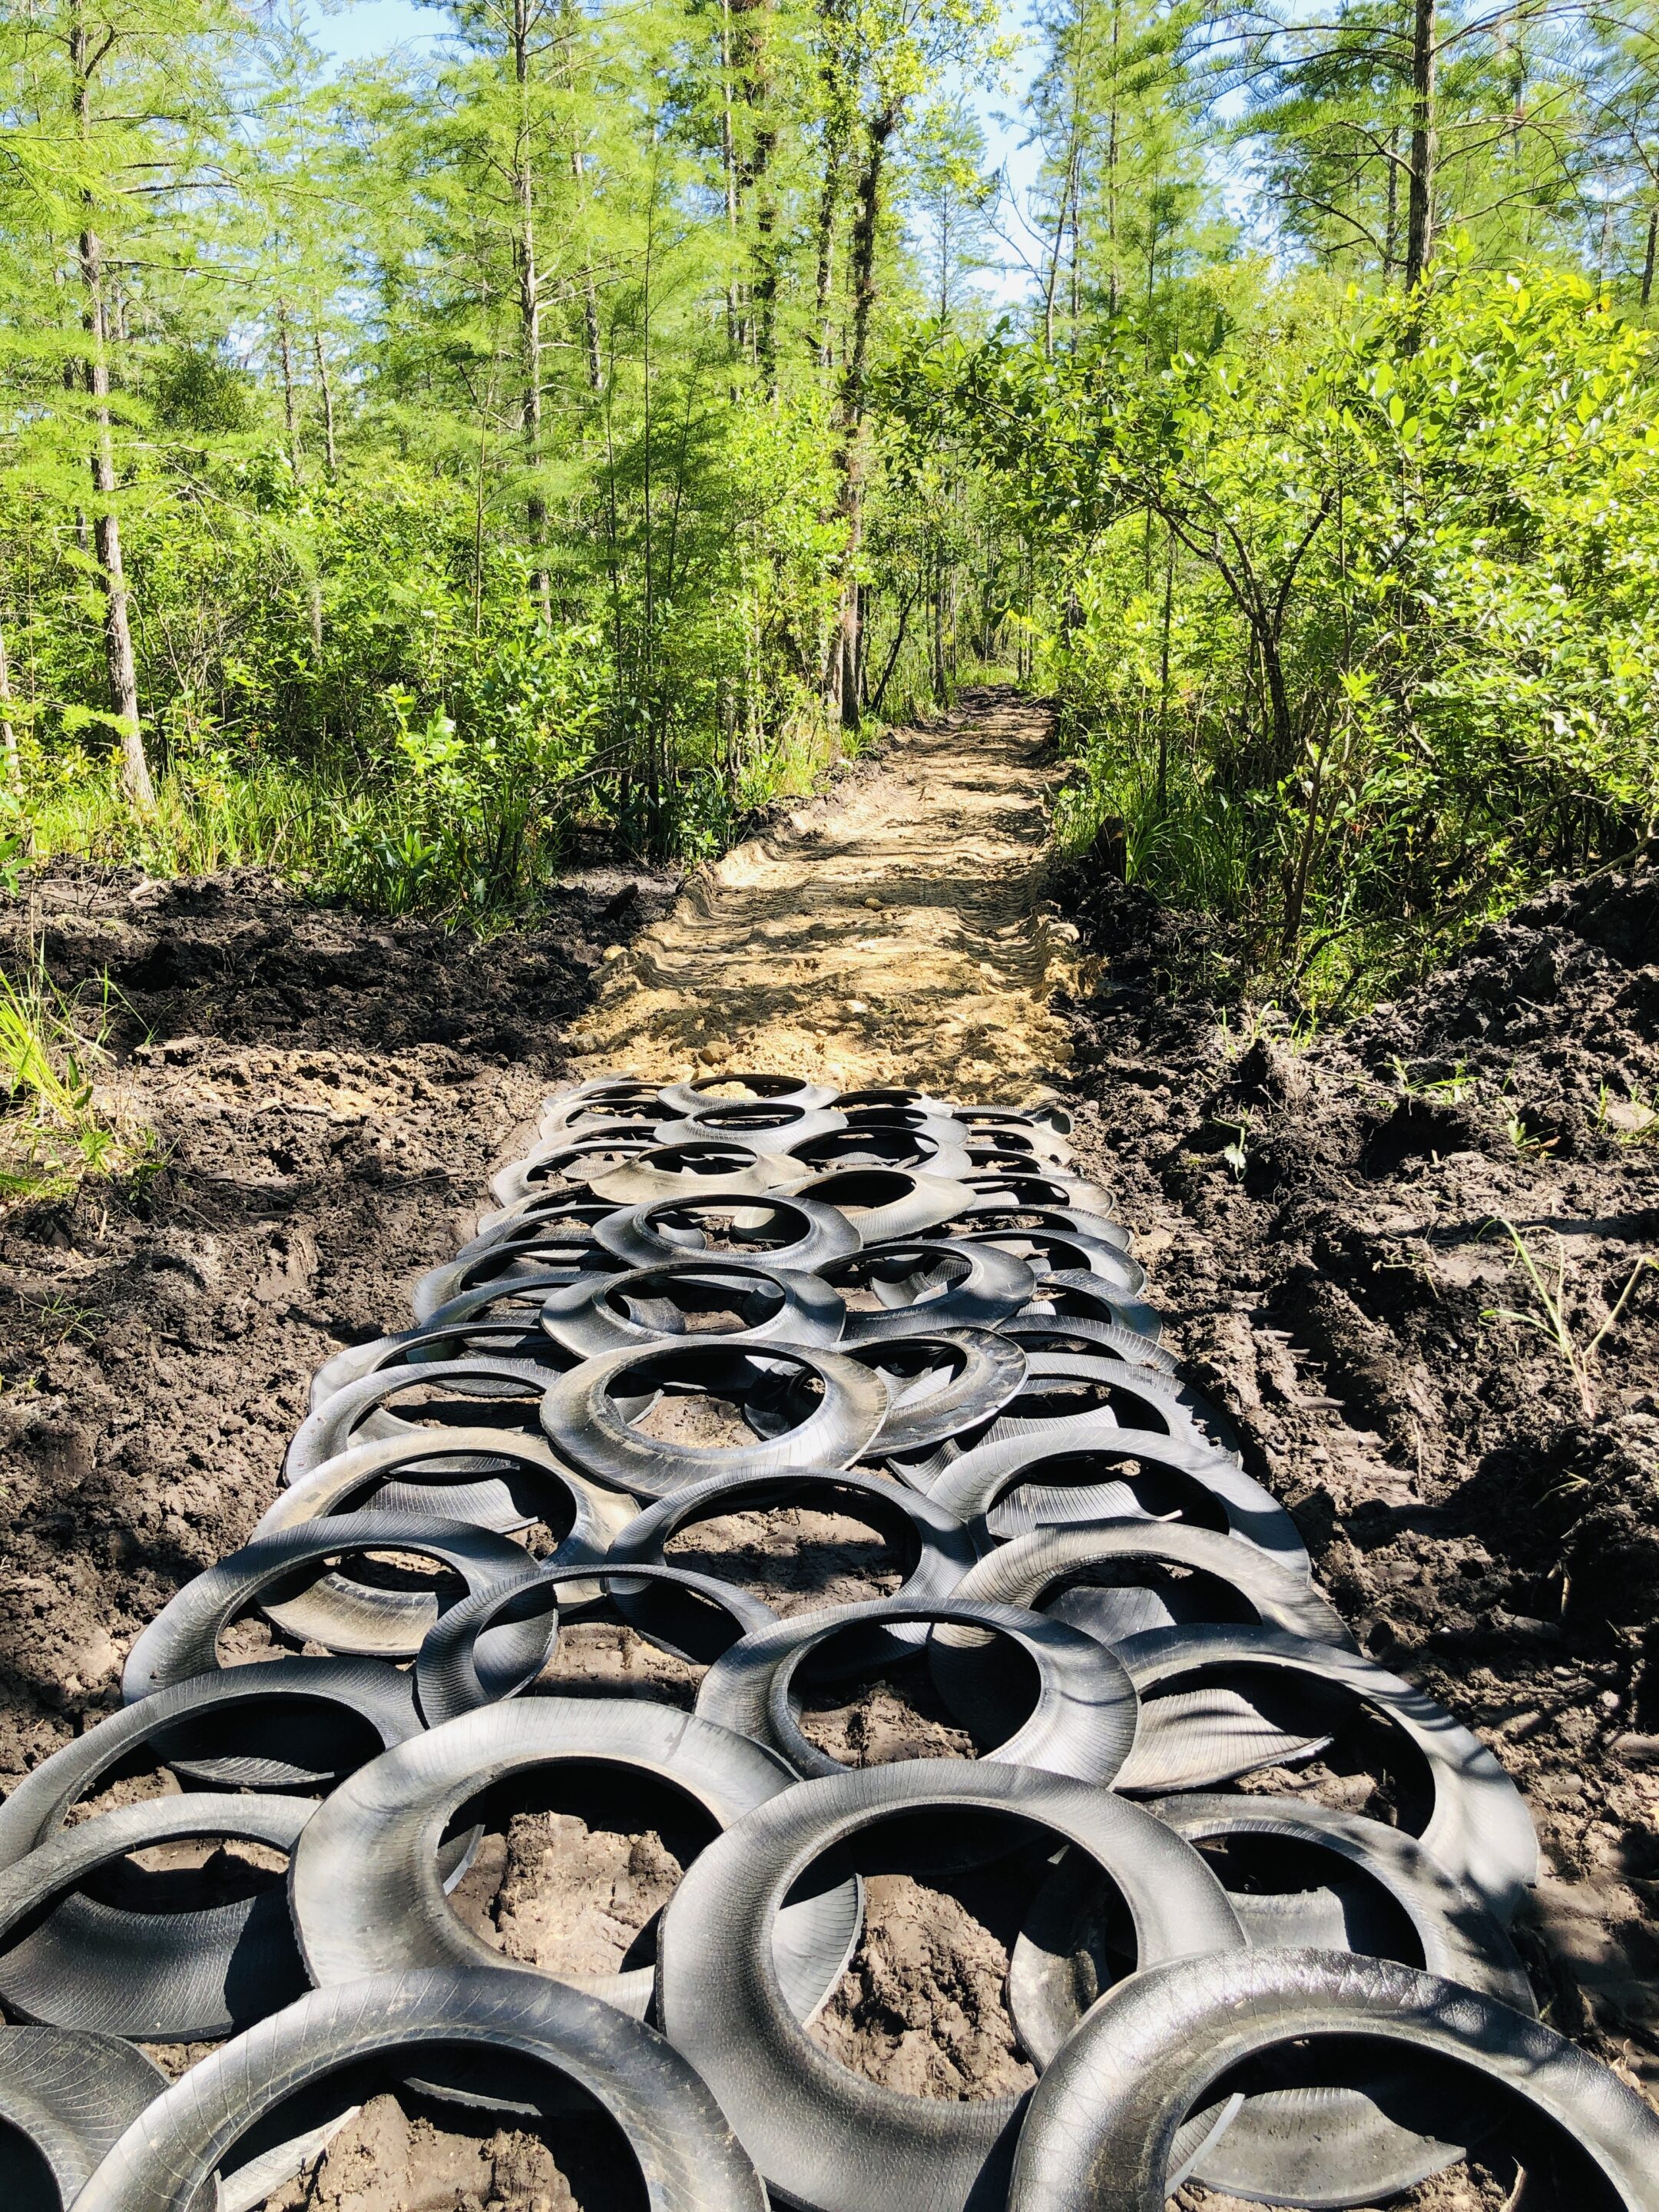 Road foundation with used tires